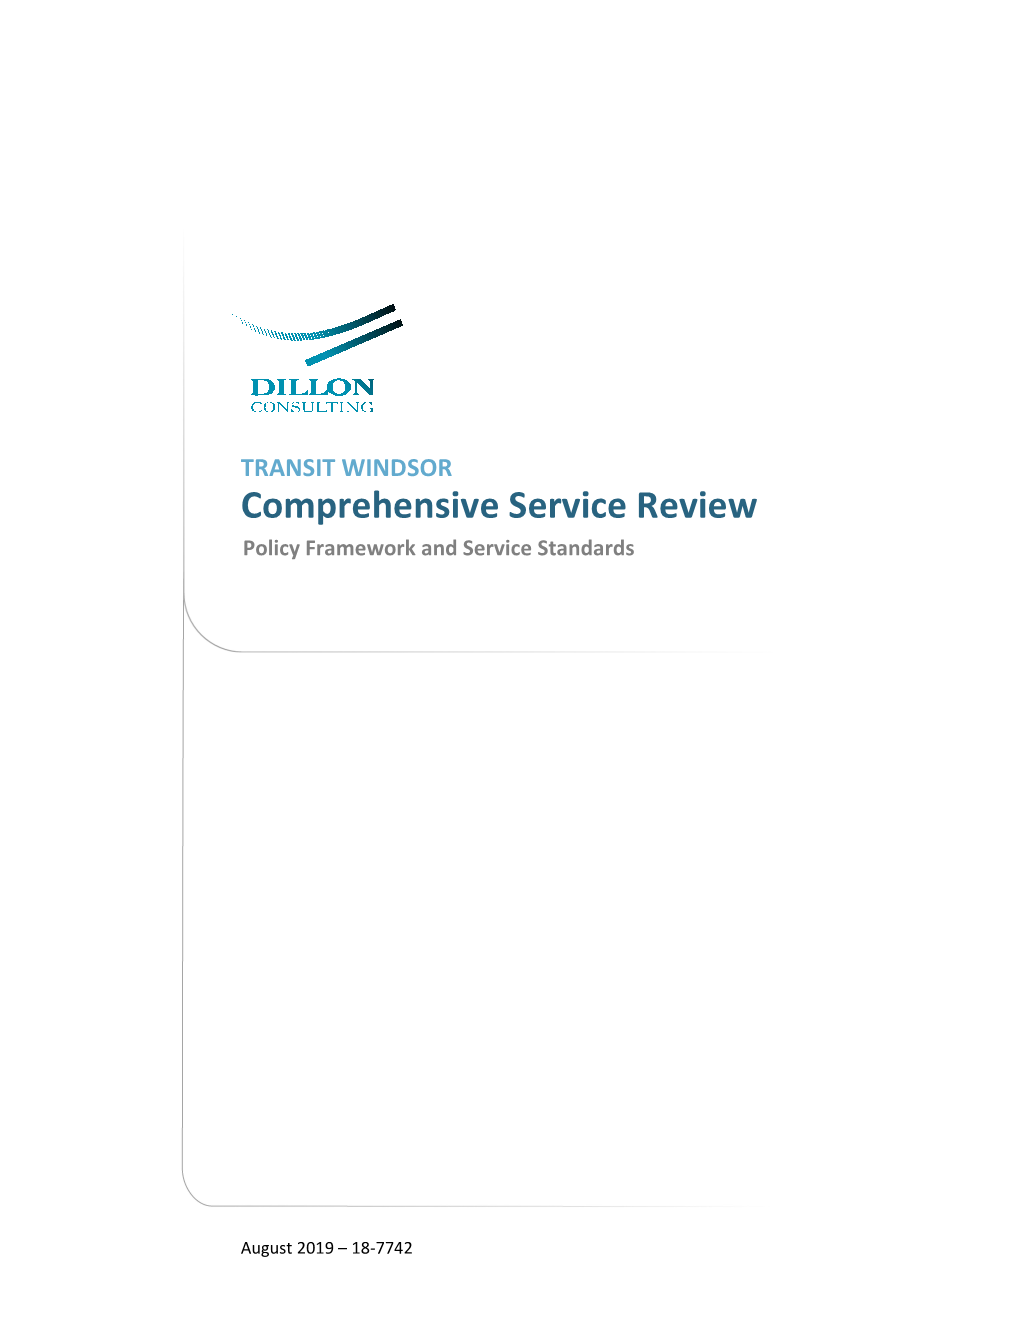 Comprehensive Service Review Policy Framework and Service Standards